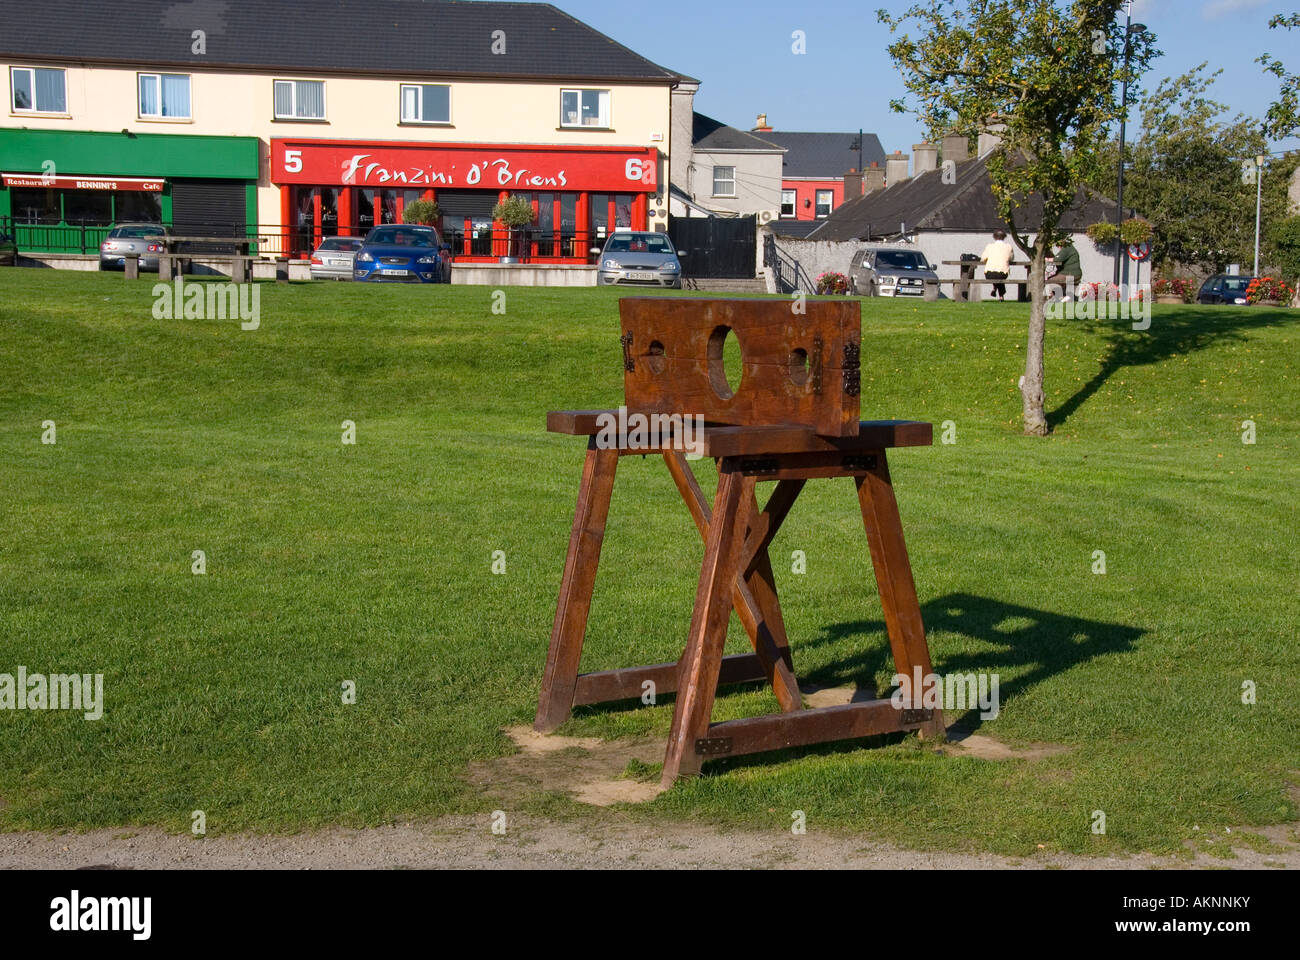 A modern version of mediaeval stocks on display at Trim castle county Meath Ireland Stock Photo